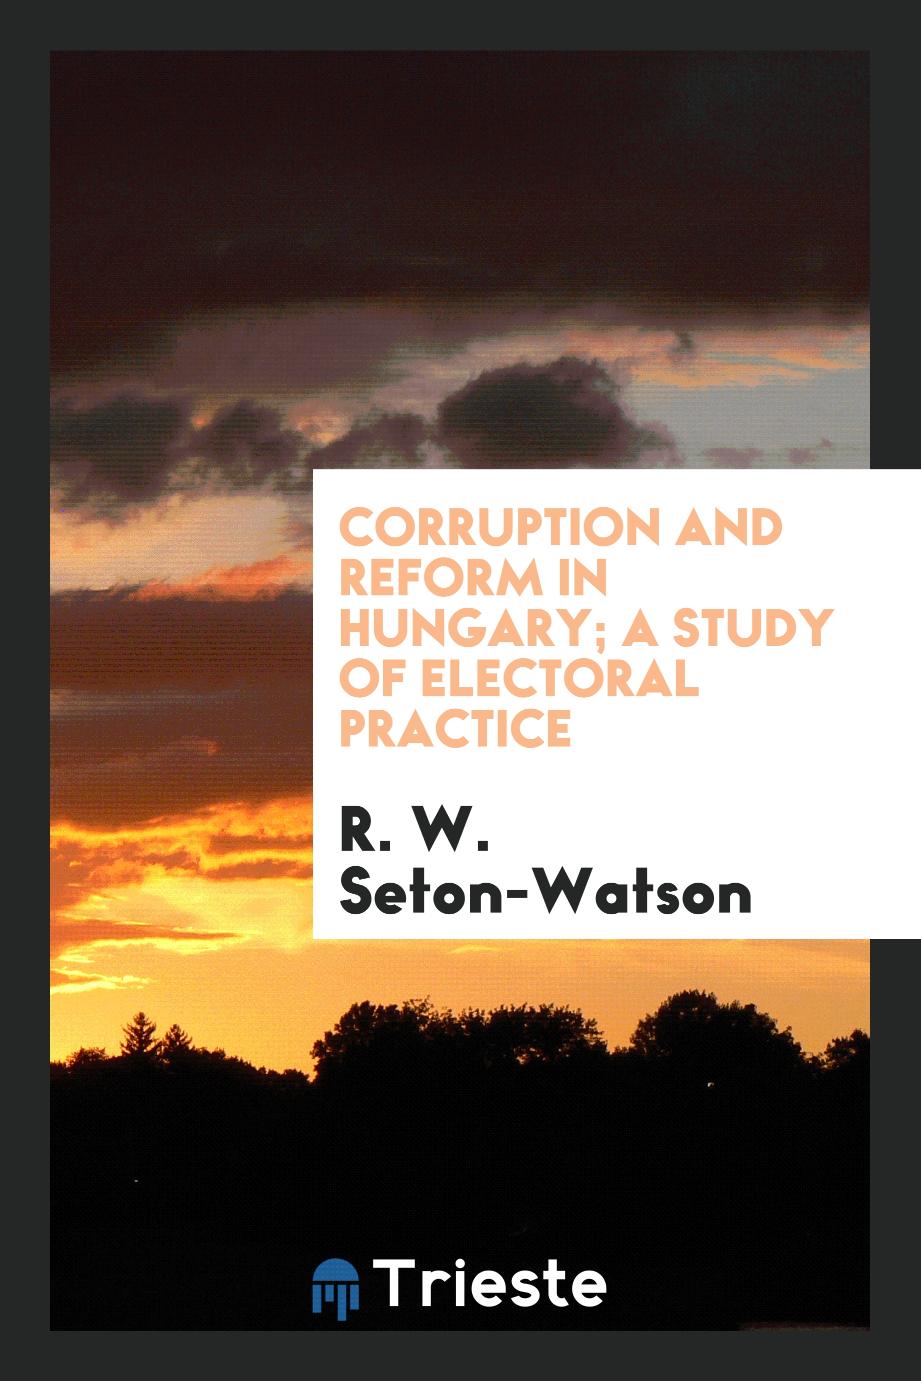 Corruption and reform in Hungary; a study of electoral practice